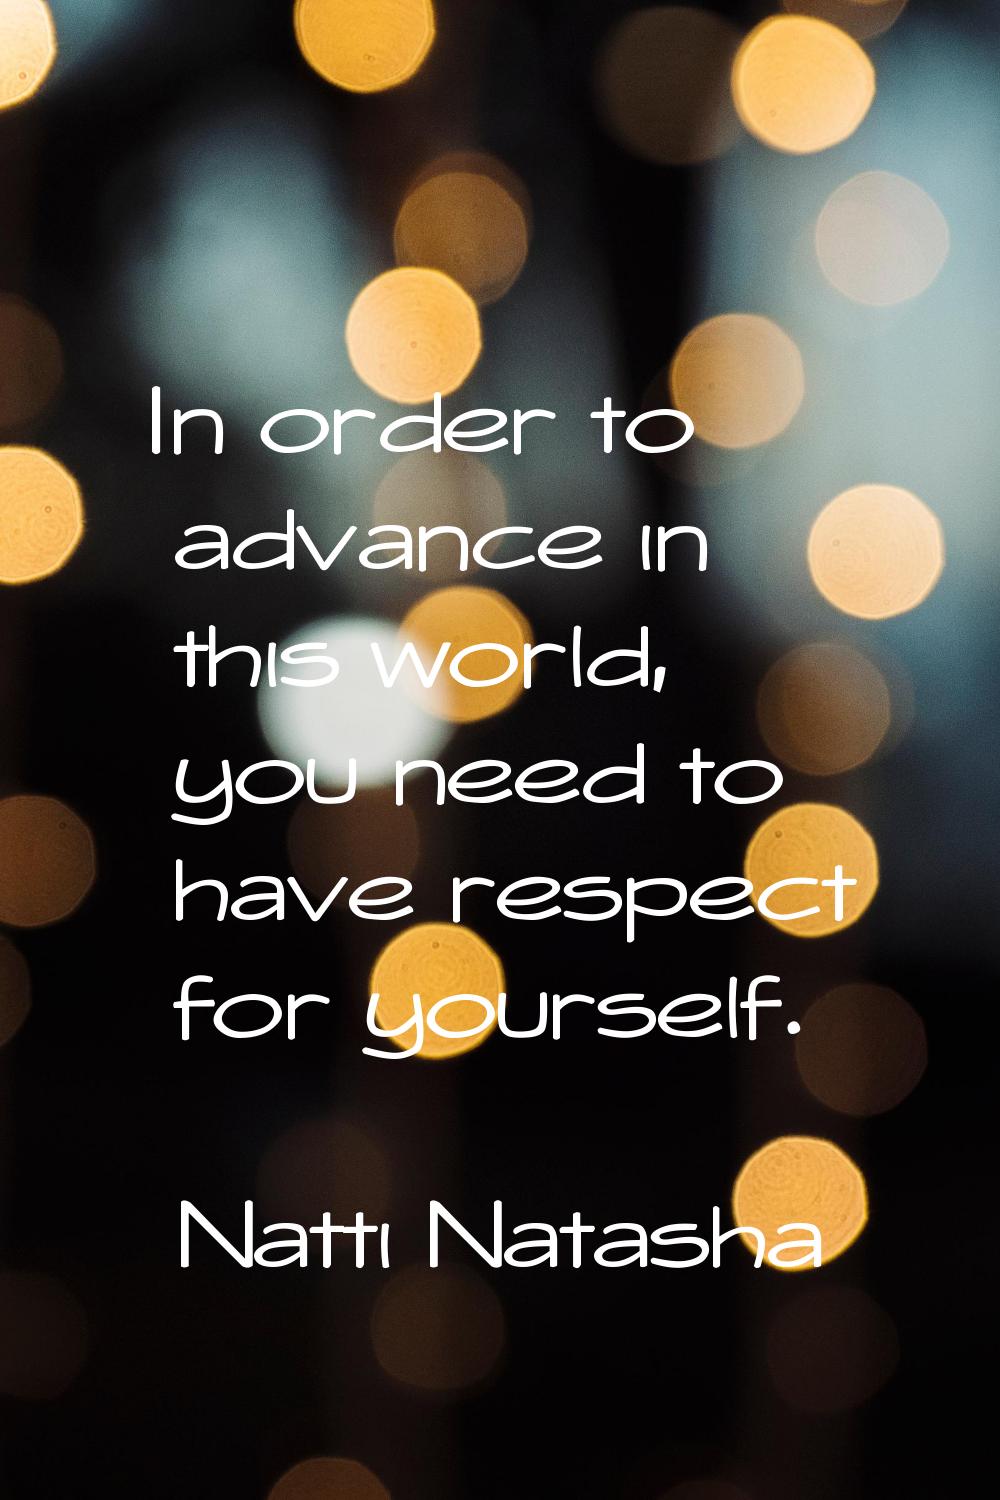 In order to advance in this world, you need to have respect for yourself.